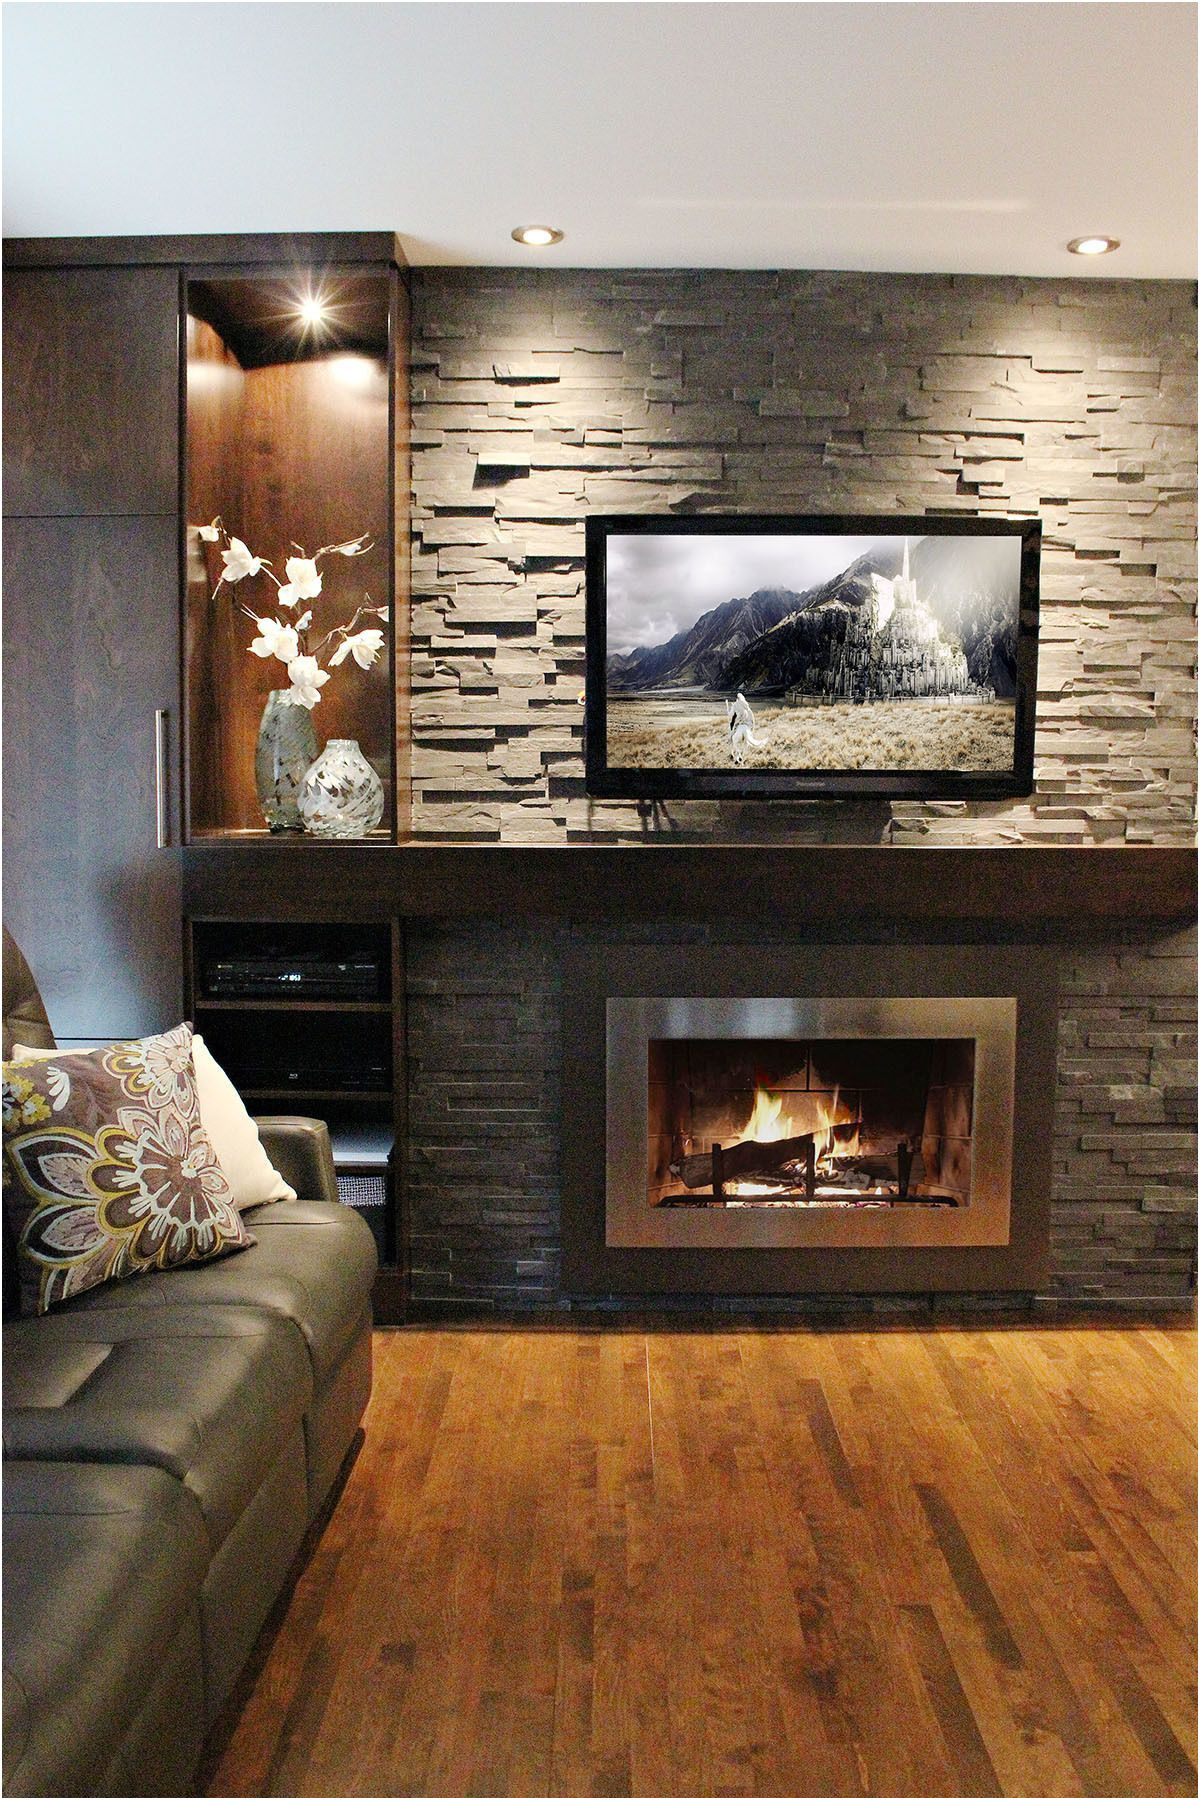 In Wall Fireplace Ideas New 30 Incredible Fireplace Ideas for Your Best Home Design